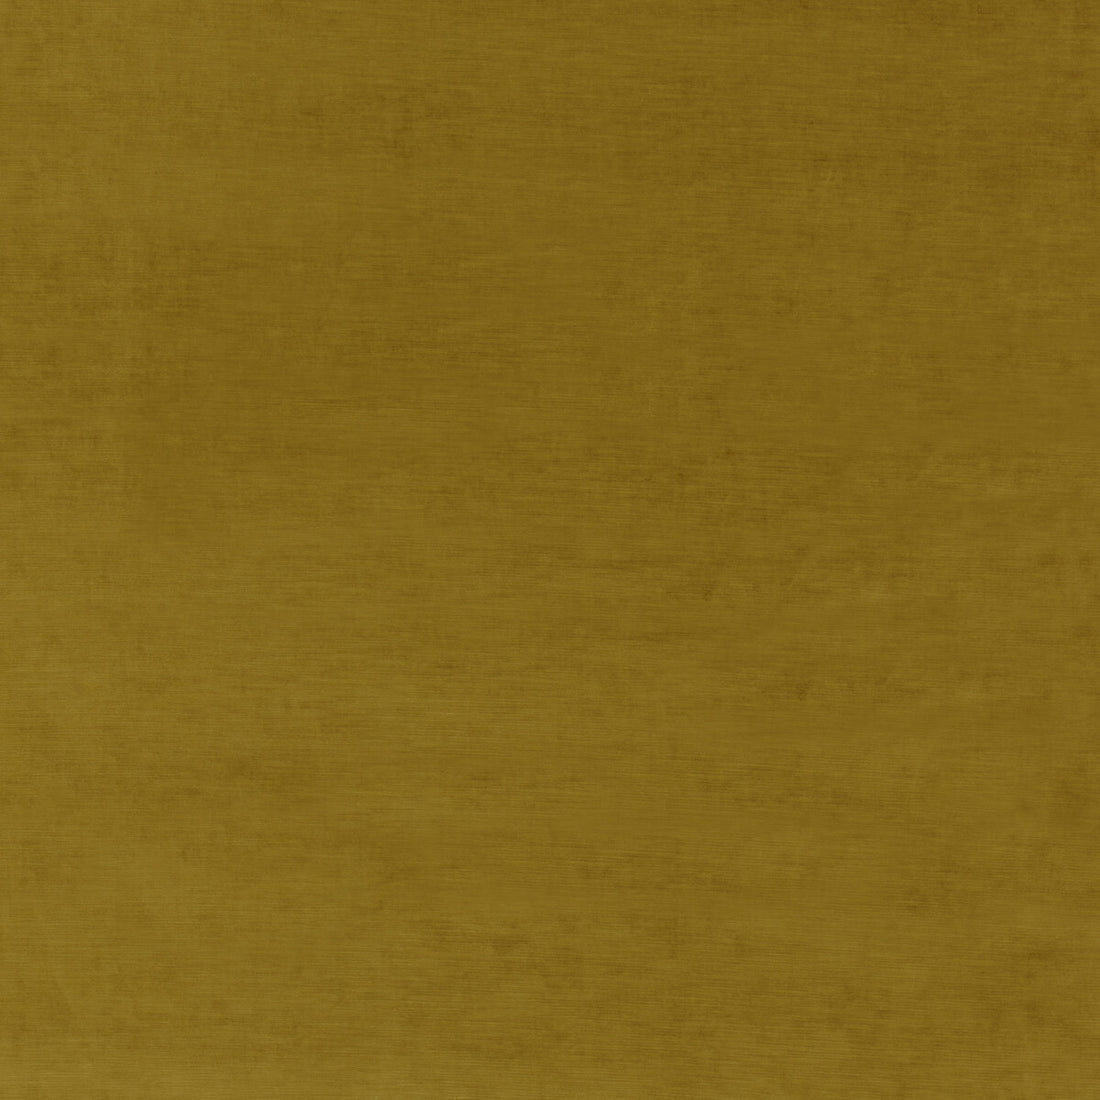 Meridian Velvet fabric in mustard color - pattern ED85292.825.0 - by Threads in the Meridian collection